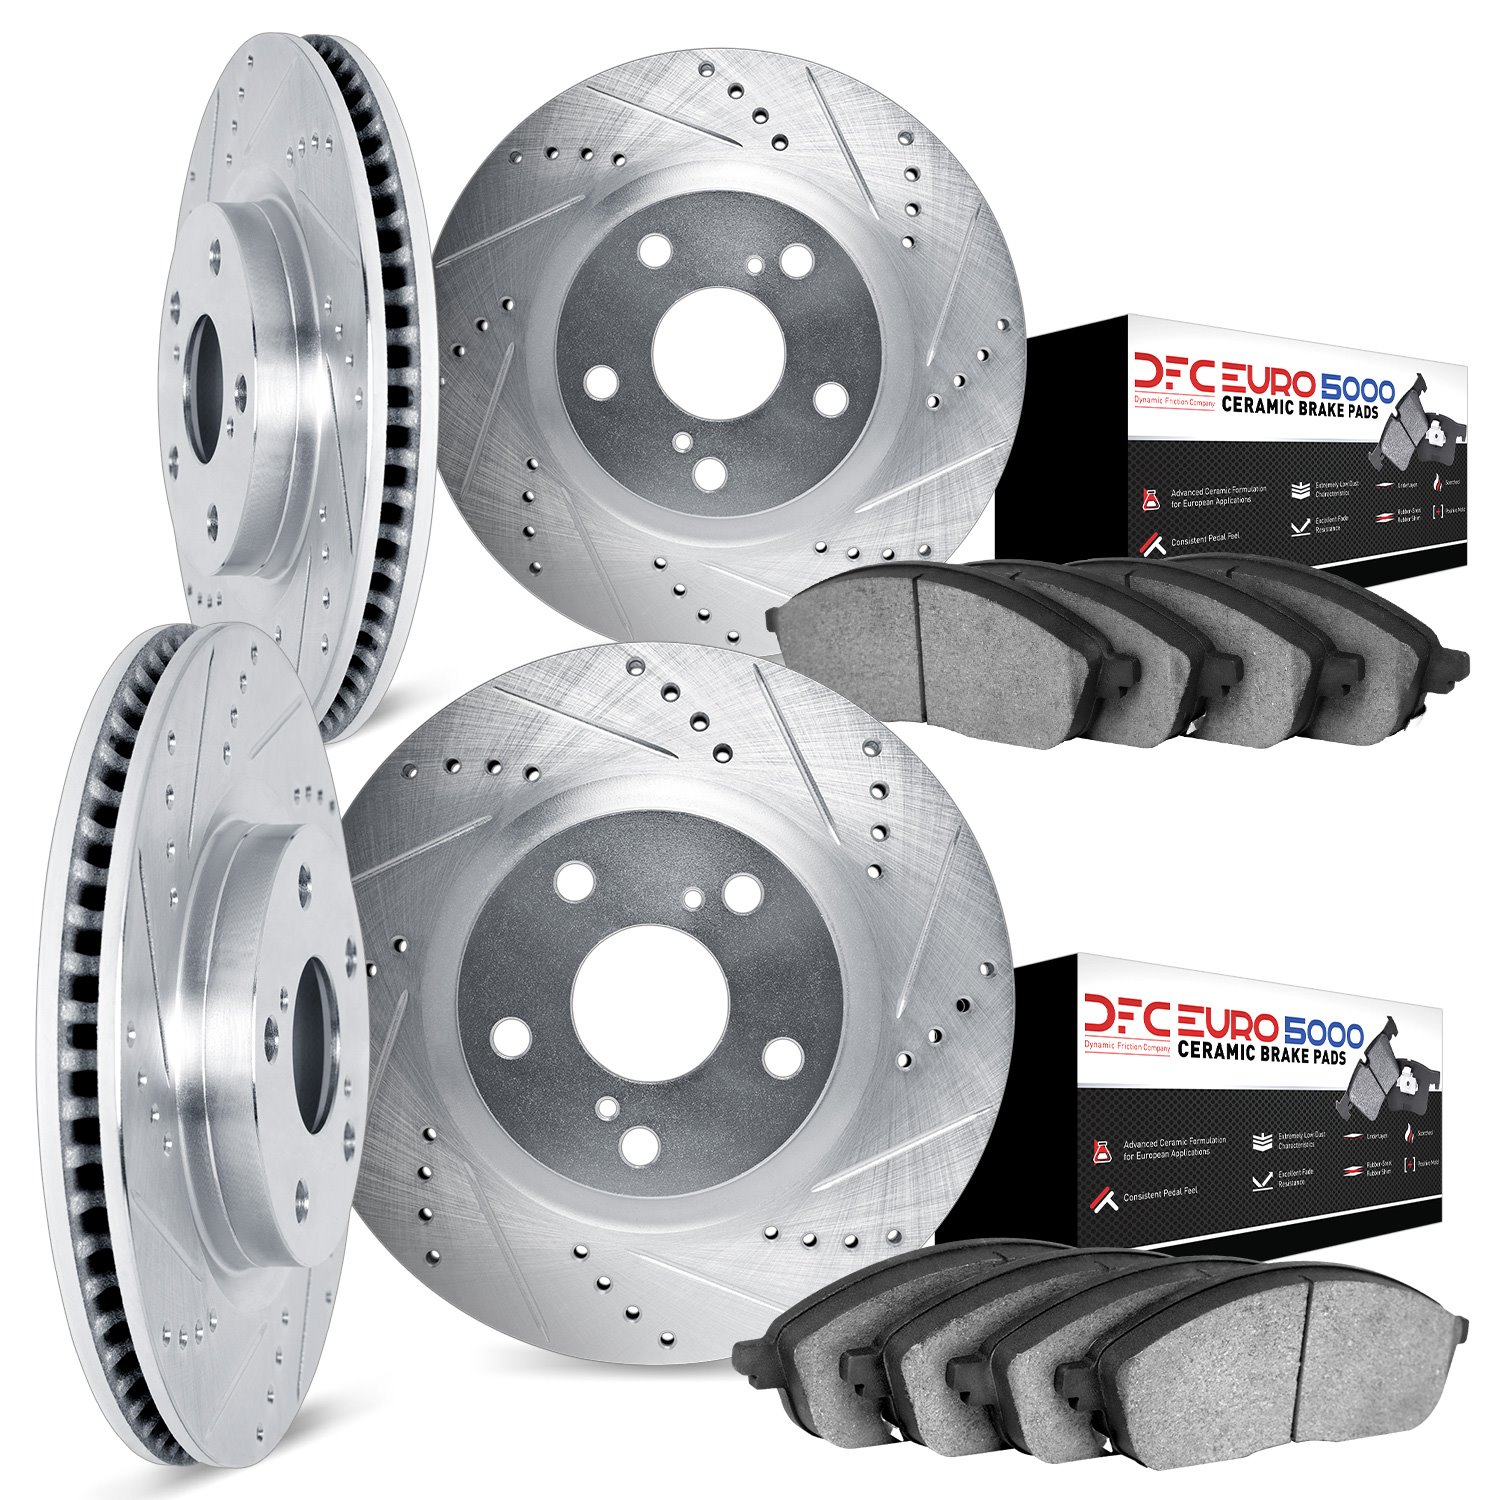 7604-02005 Drilled/Slotted Brake Rotors w/5000 Euro Ceramic Brake Pads Kit [Silver], 1989-1997 Porsche, Position: Front and Rear